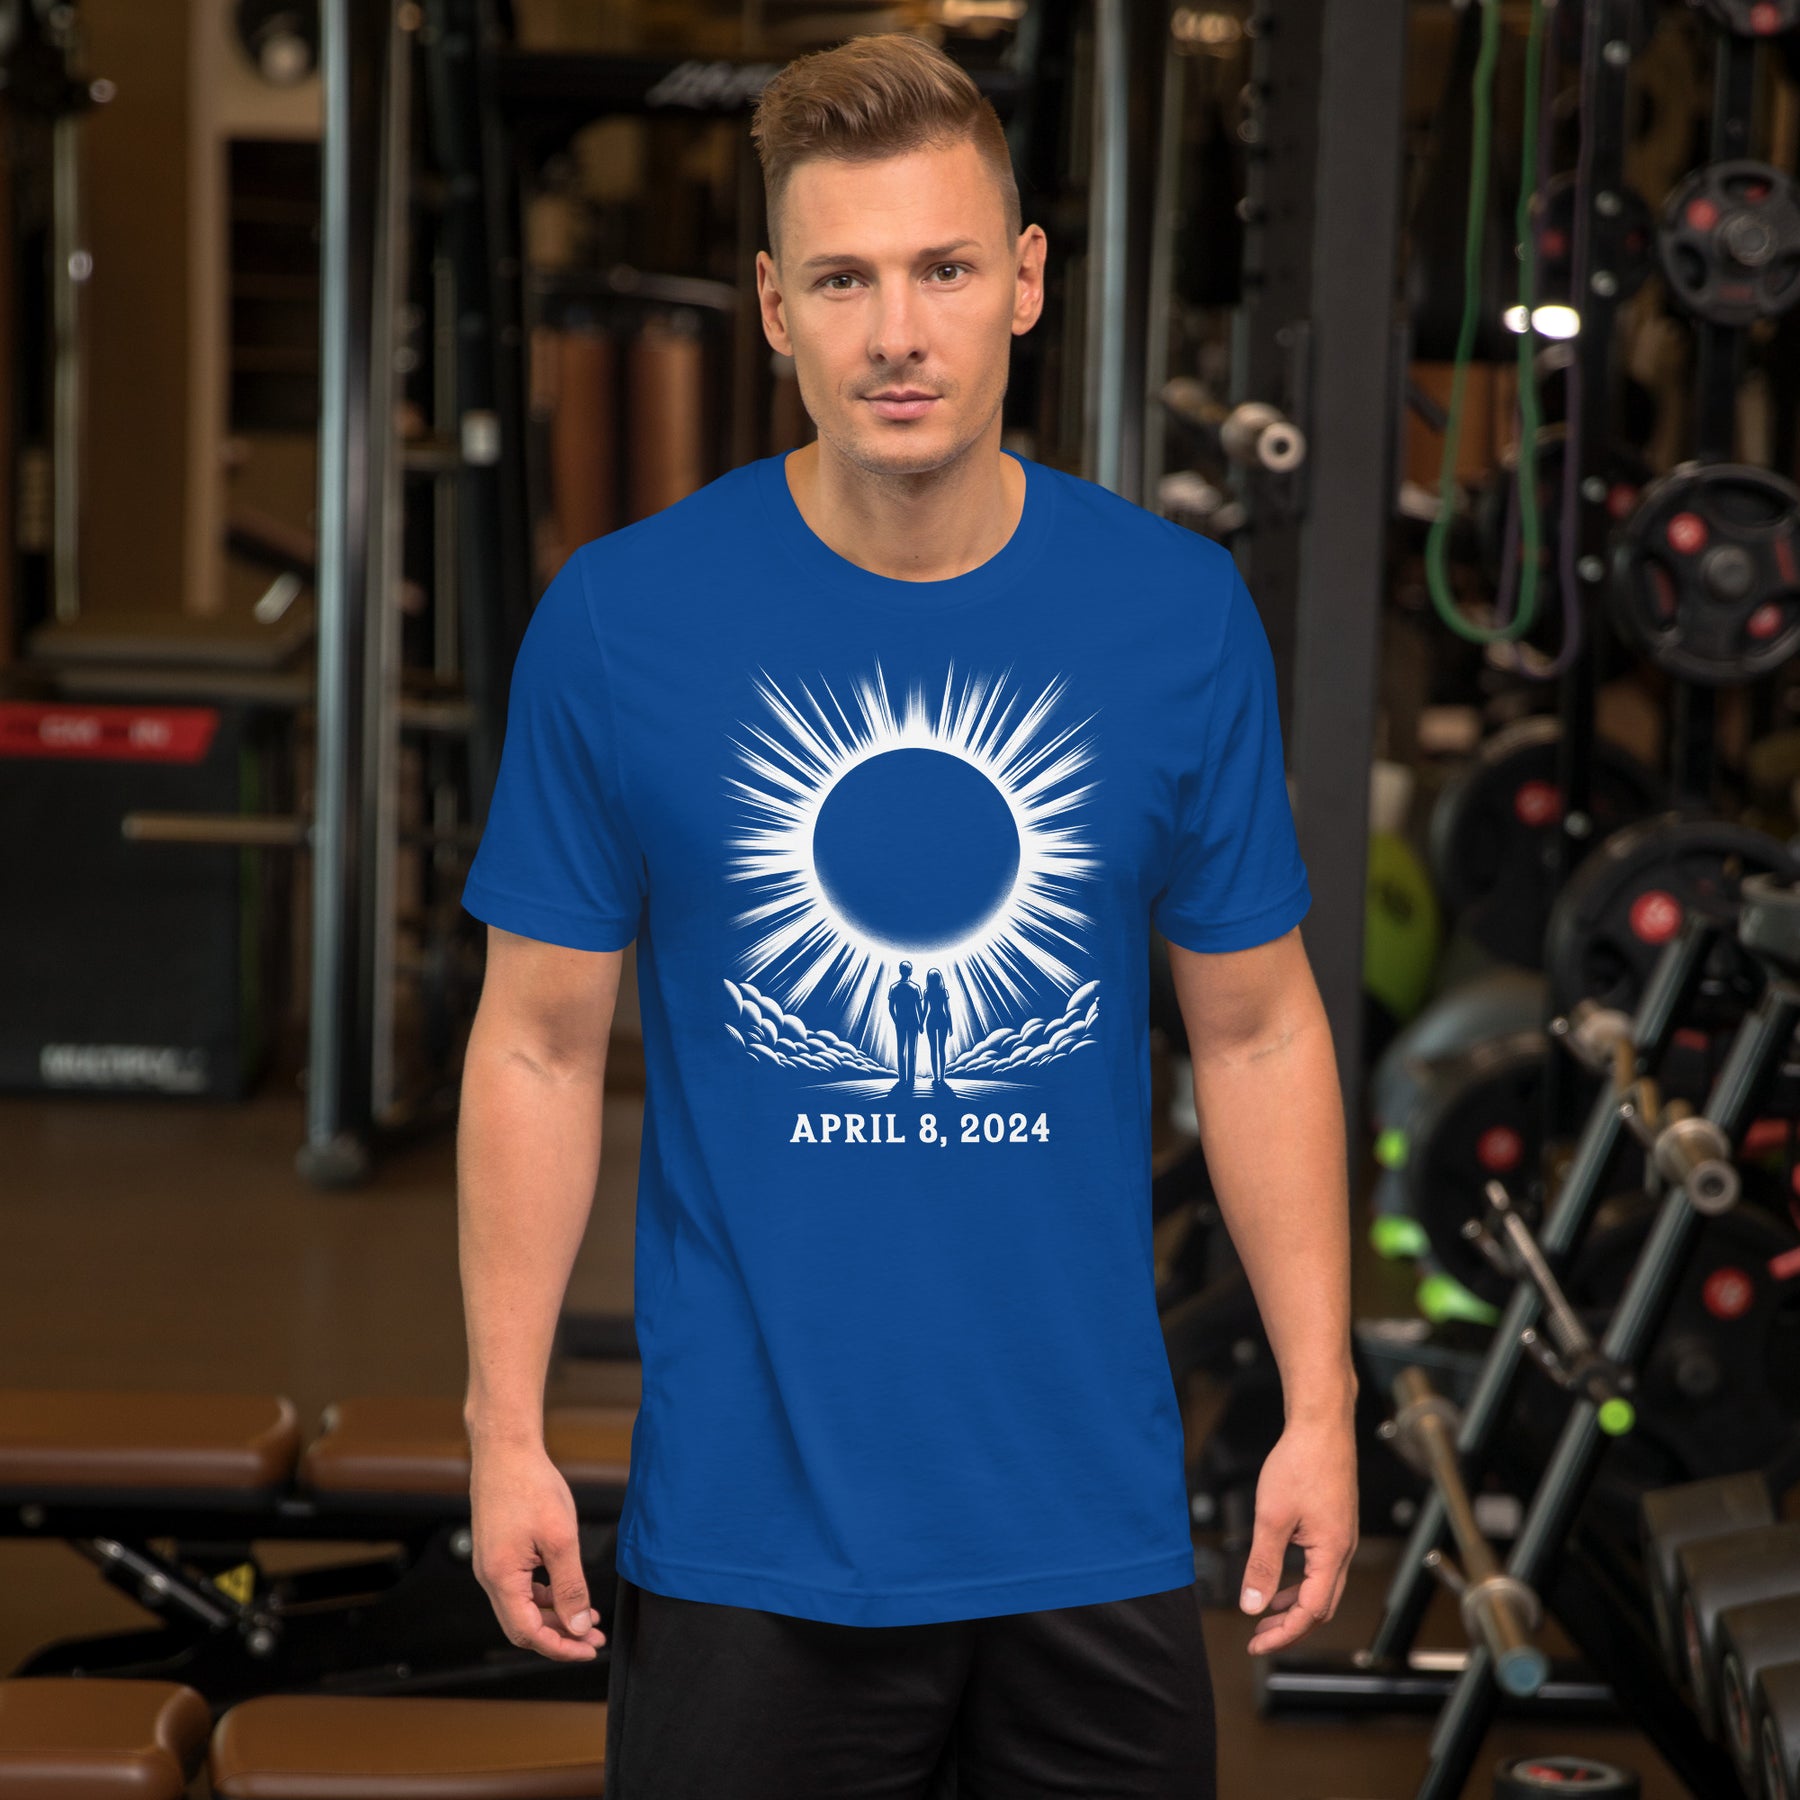 Total Solar Eclipse 2024 Shirt, April 8Anniversary Gift, Couples Tee for Husband and Wife, Boyfriend Girlfriend Astronomy Gift